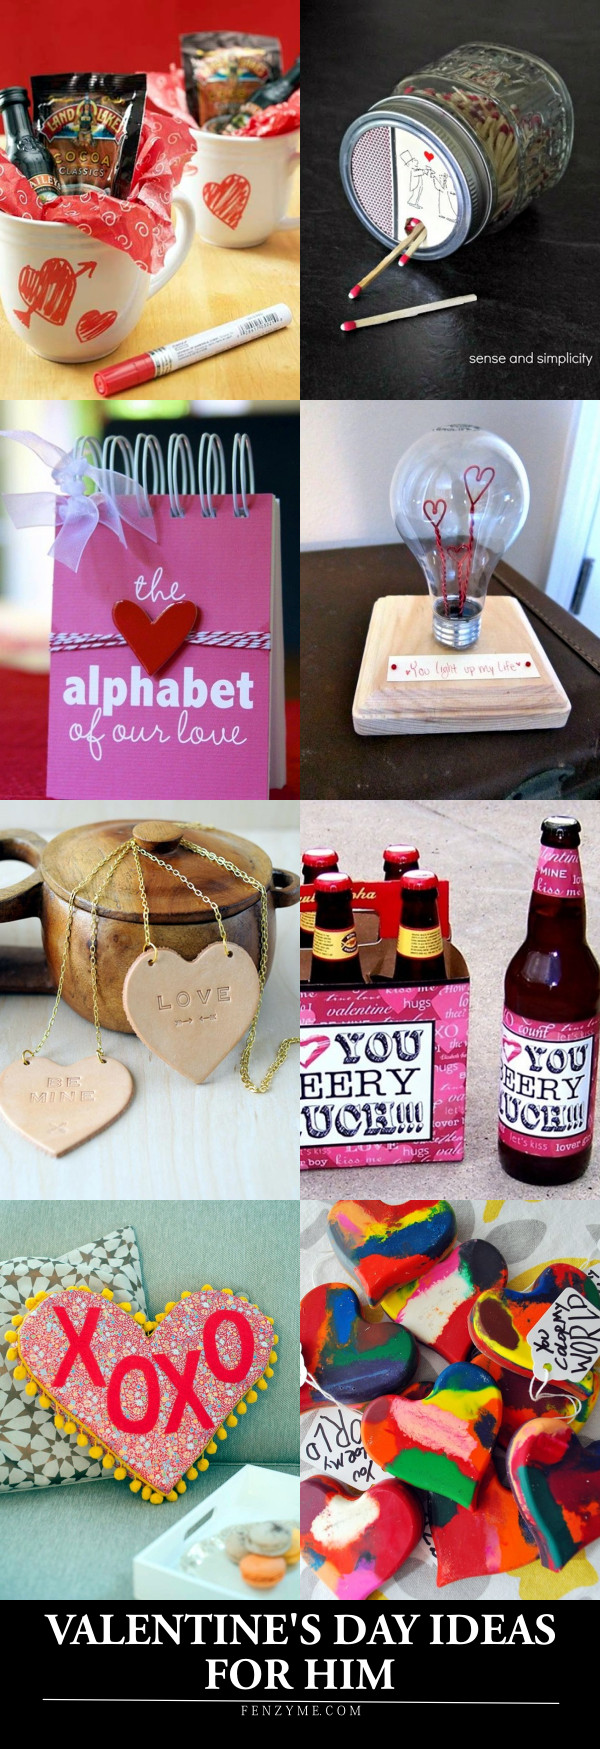 Diy Valentines Gift Ideas For Him
 101 Homemade Valentines Day Ideas for Him that re really CUTE